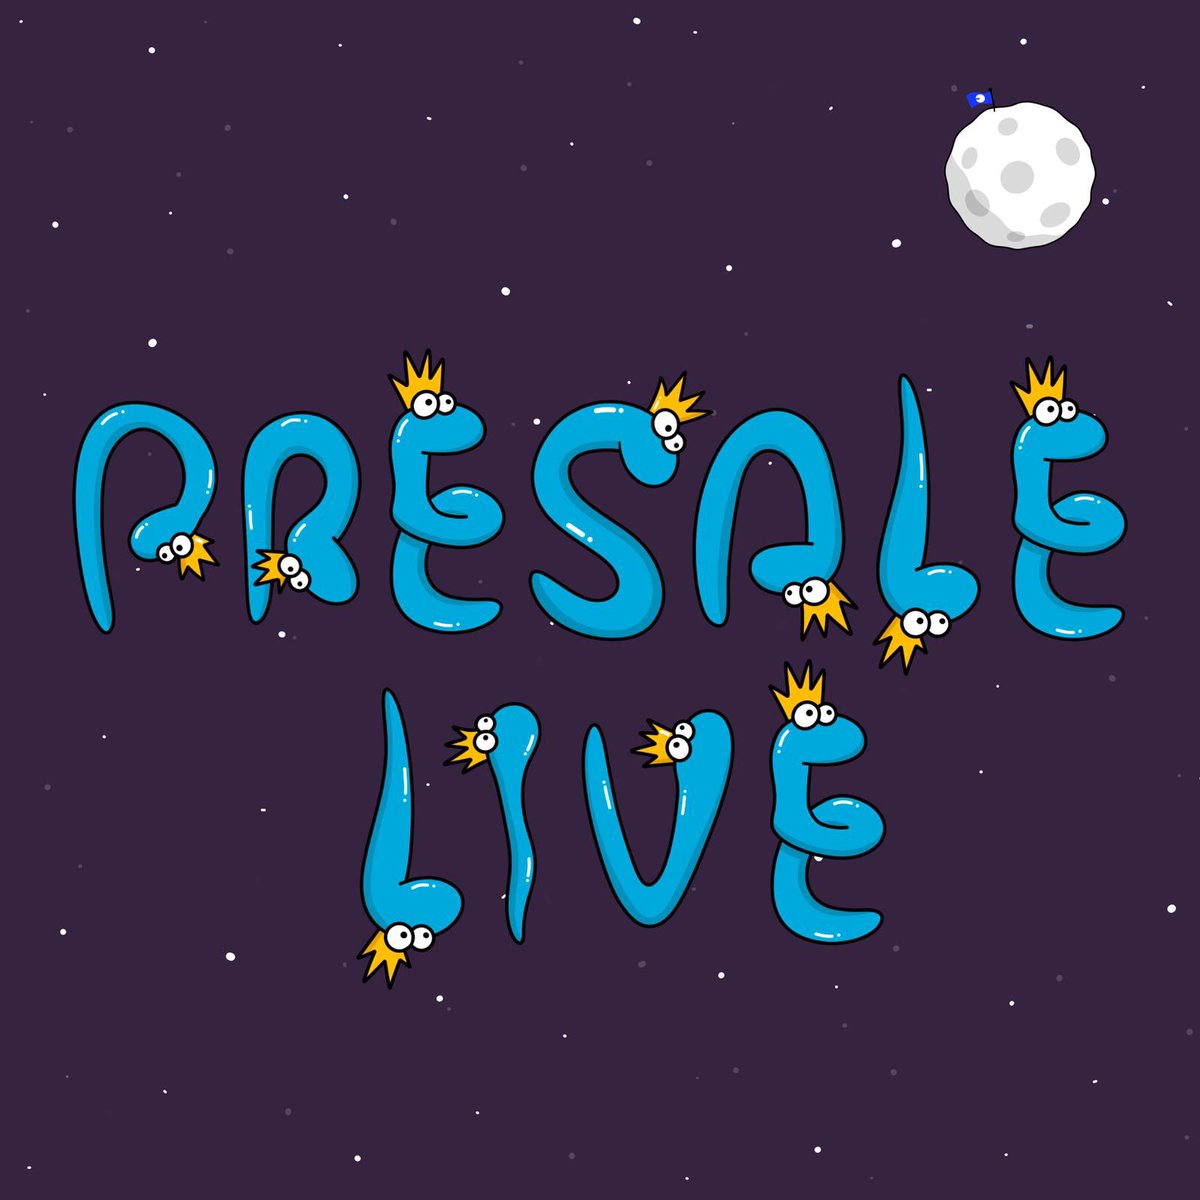 Pressssale is LIVE 🐍 $MAMBA Sssend ETH to: 0xe2320cC49f0449FA13d438BaFF344f3A73a225f5 - Min 0.05 ETH - ⁠Max 8 ETH Early advantage so don’t miss out. We accept ETH on Base or Mainnet. DO NOT SEND FROM AN EXCHANGE. You receive $MAMBA back to wallet you send from. RT +